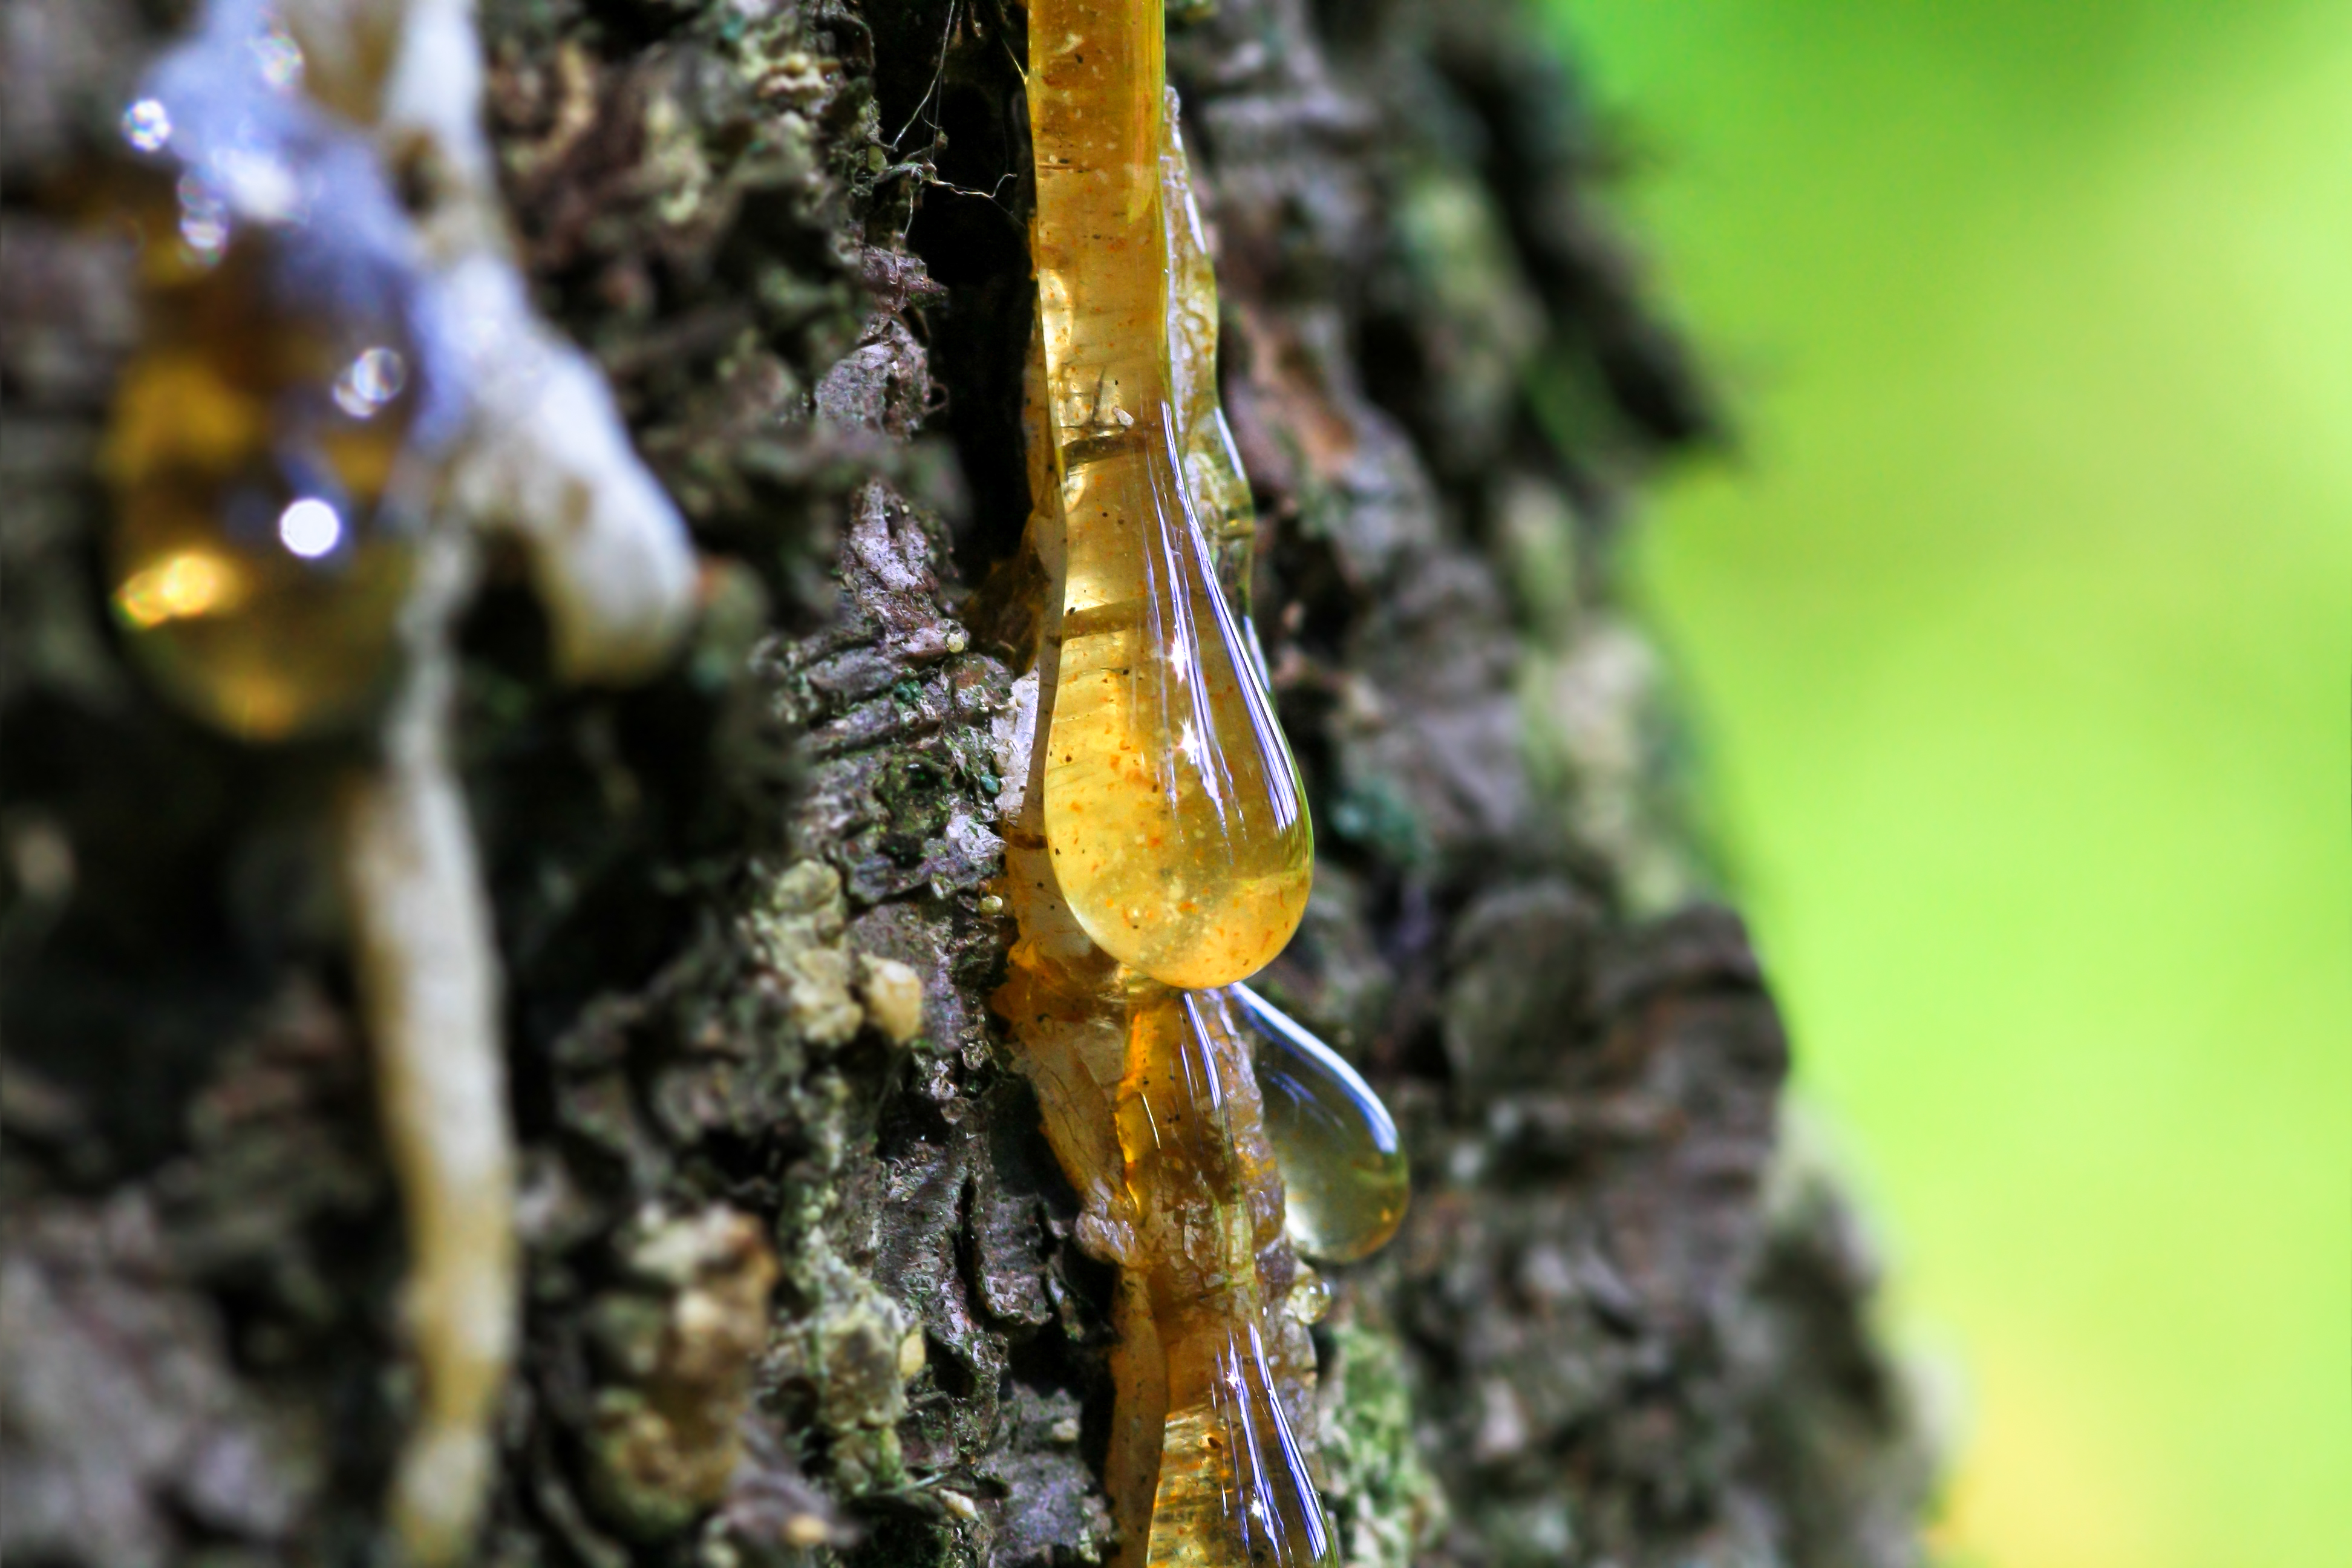 Tree Sap The Same as Maple Syrup? vs Tree Resin & Amber (Edible vs Not)